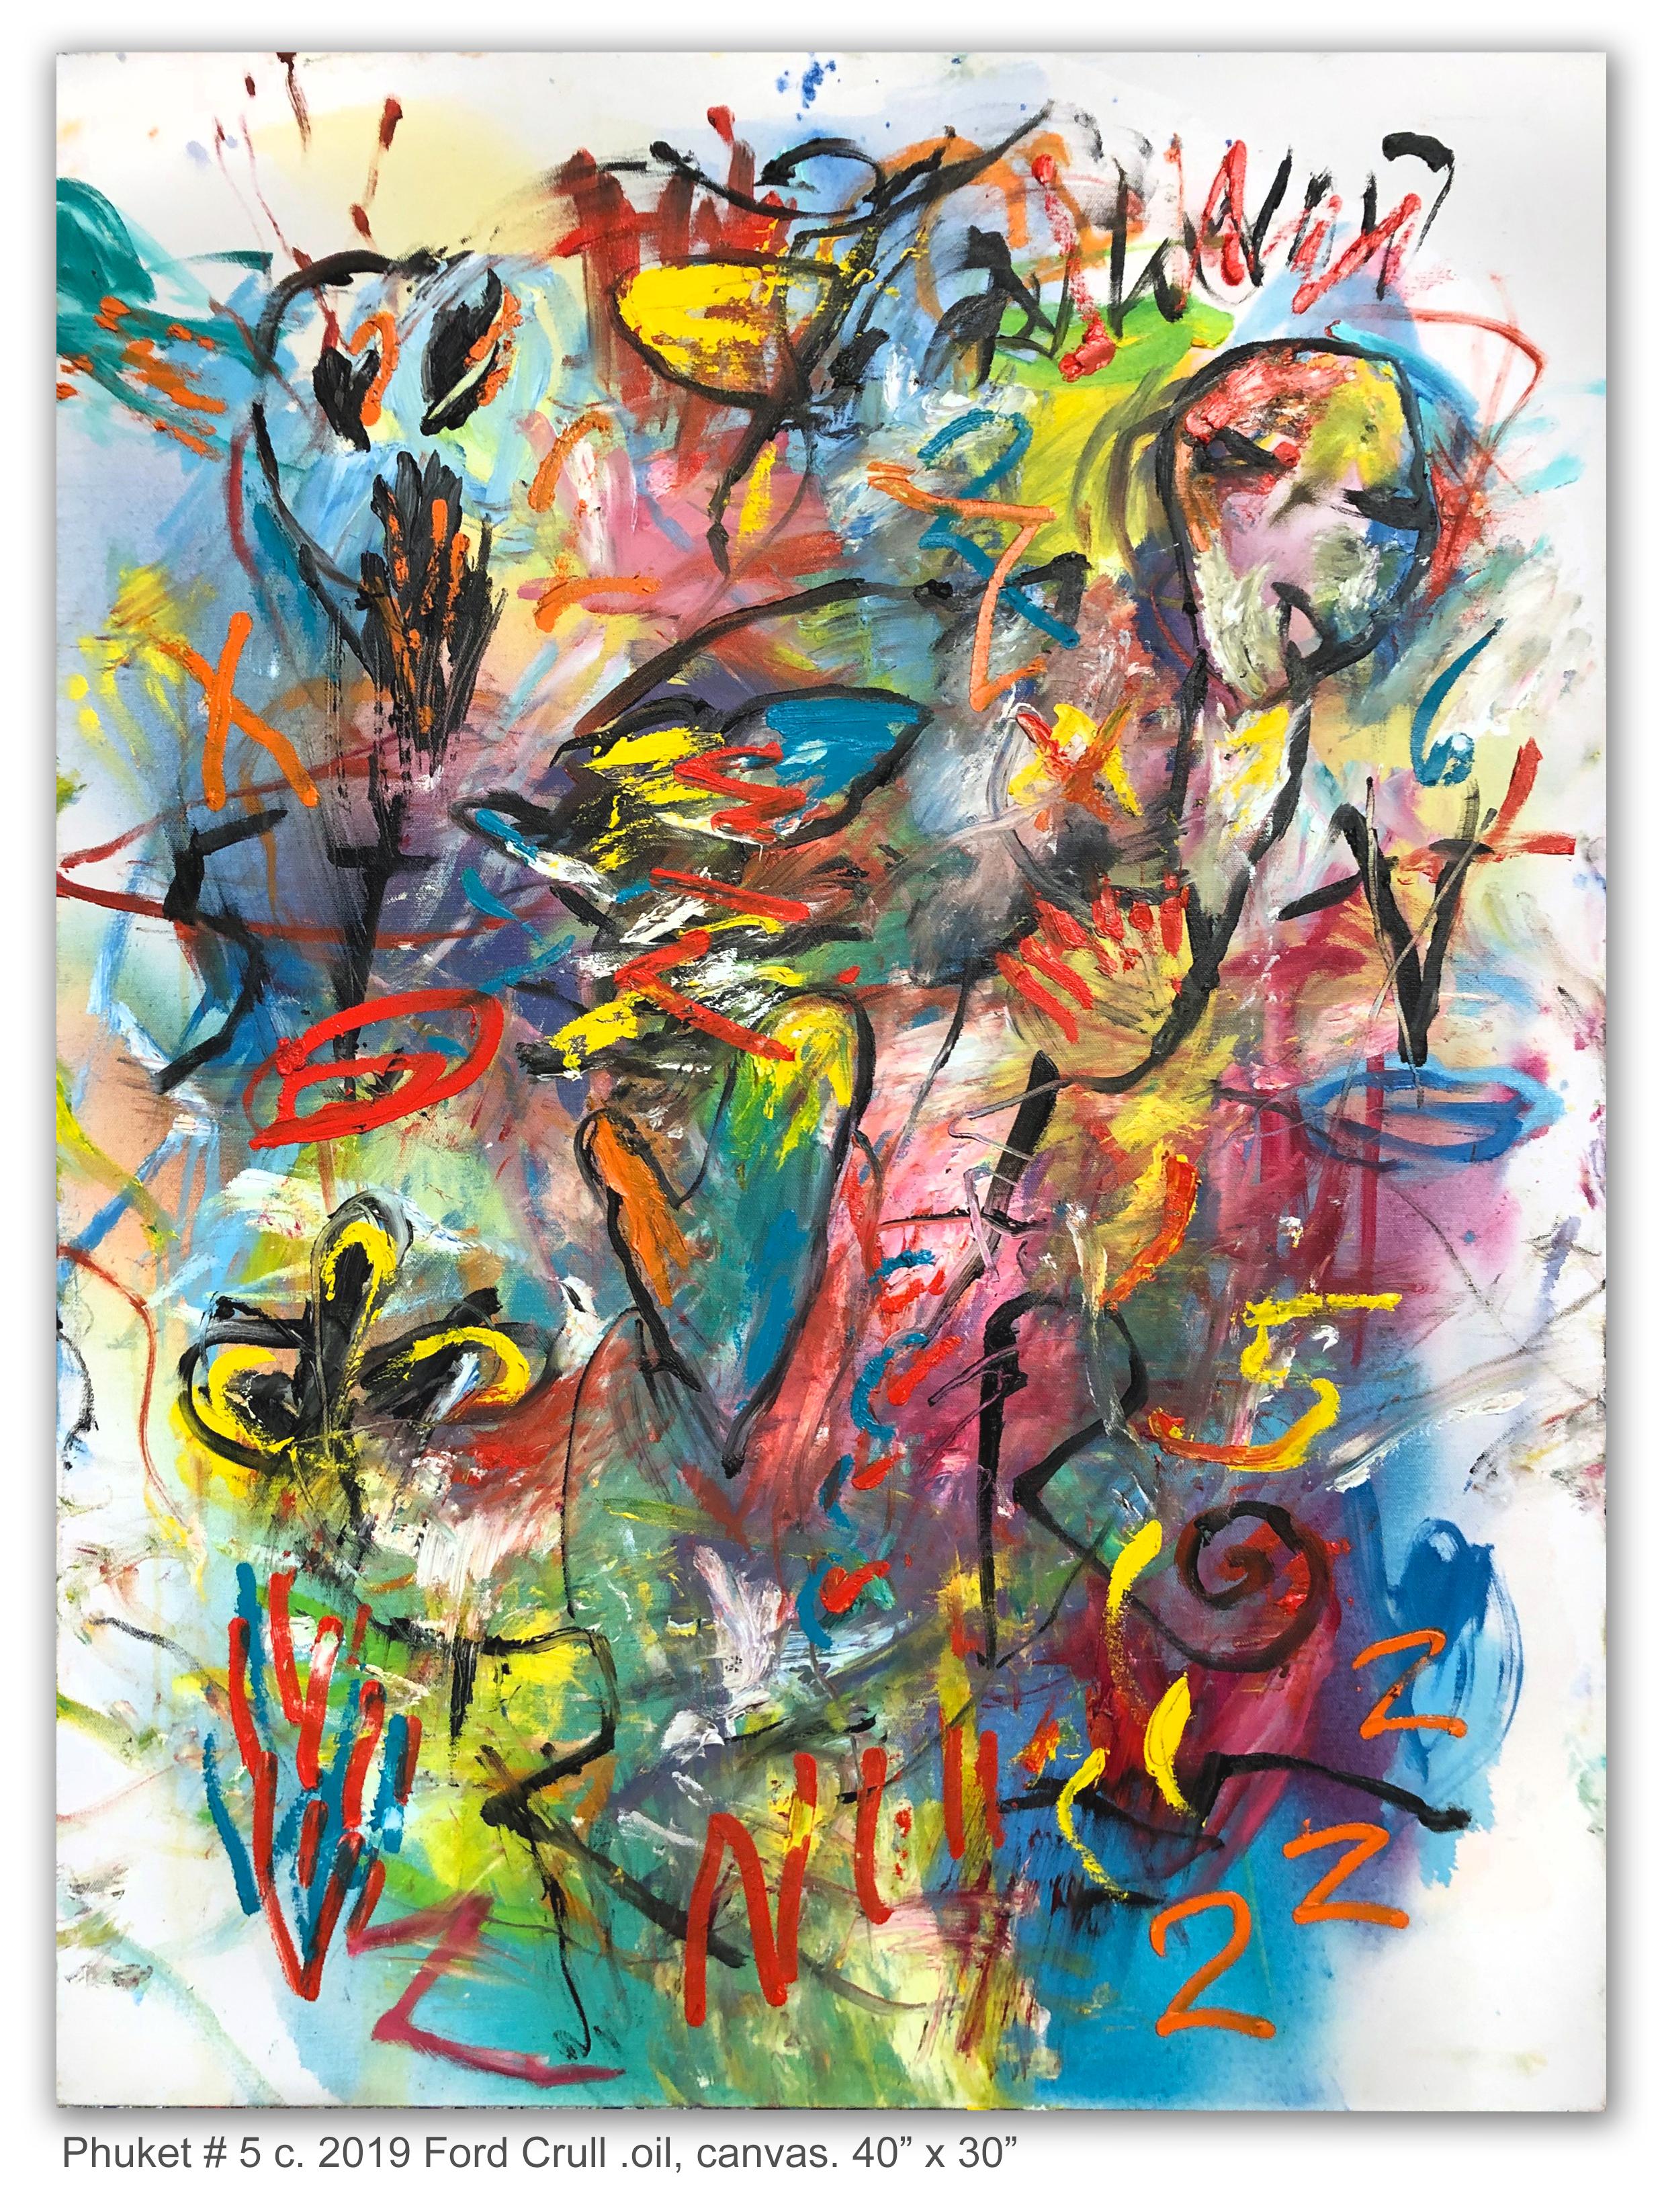 Ford Crull Abstract Painting - PHUKET #5 - yellow, blue, green, pink abstract painting with symbols